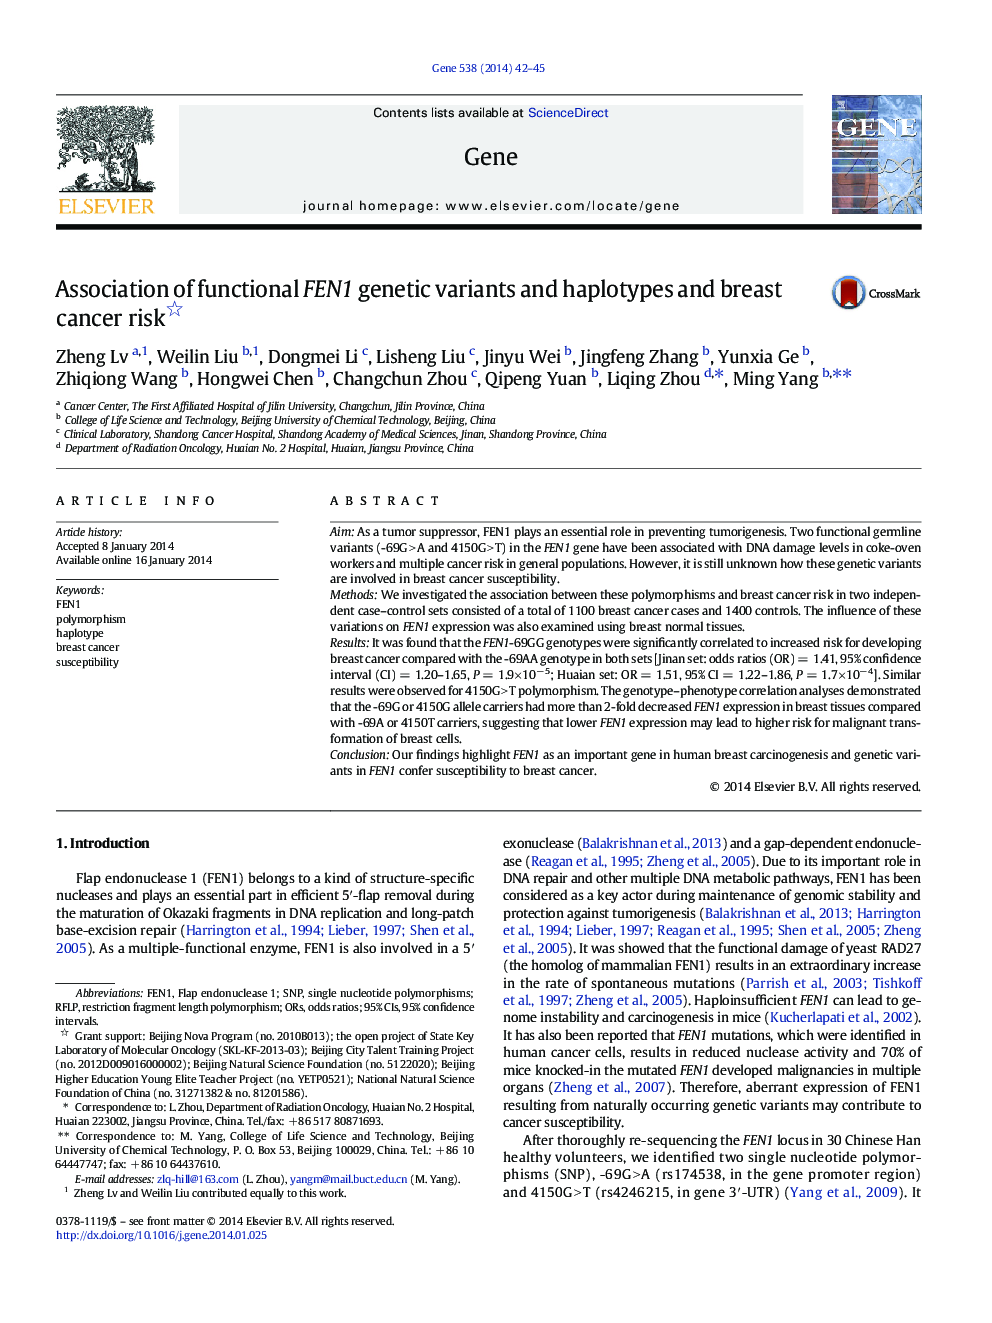 Association of functional FEN1 genetic variants and haplotypes and breast cancer risk 